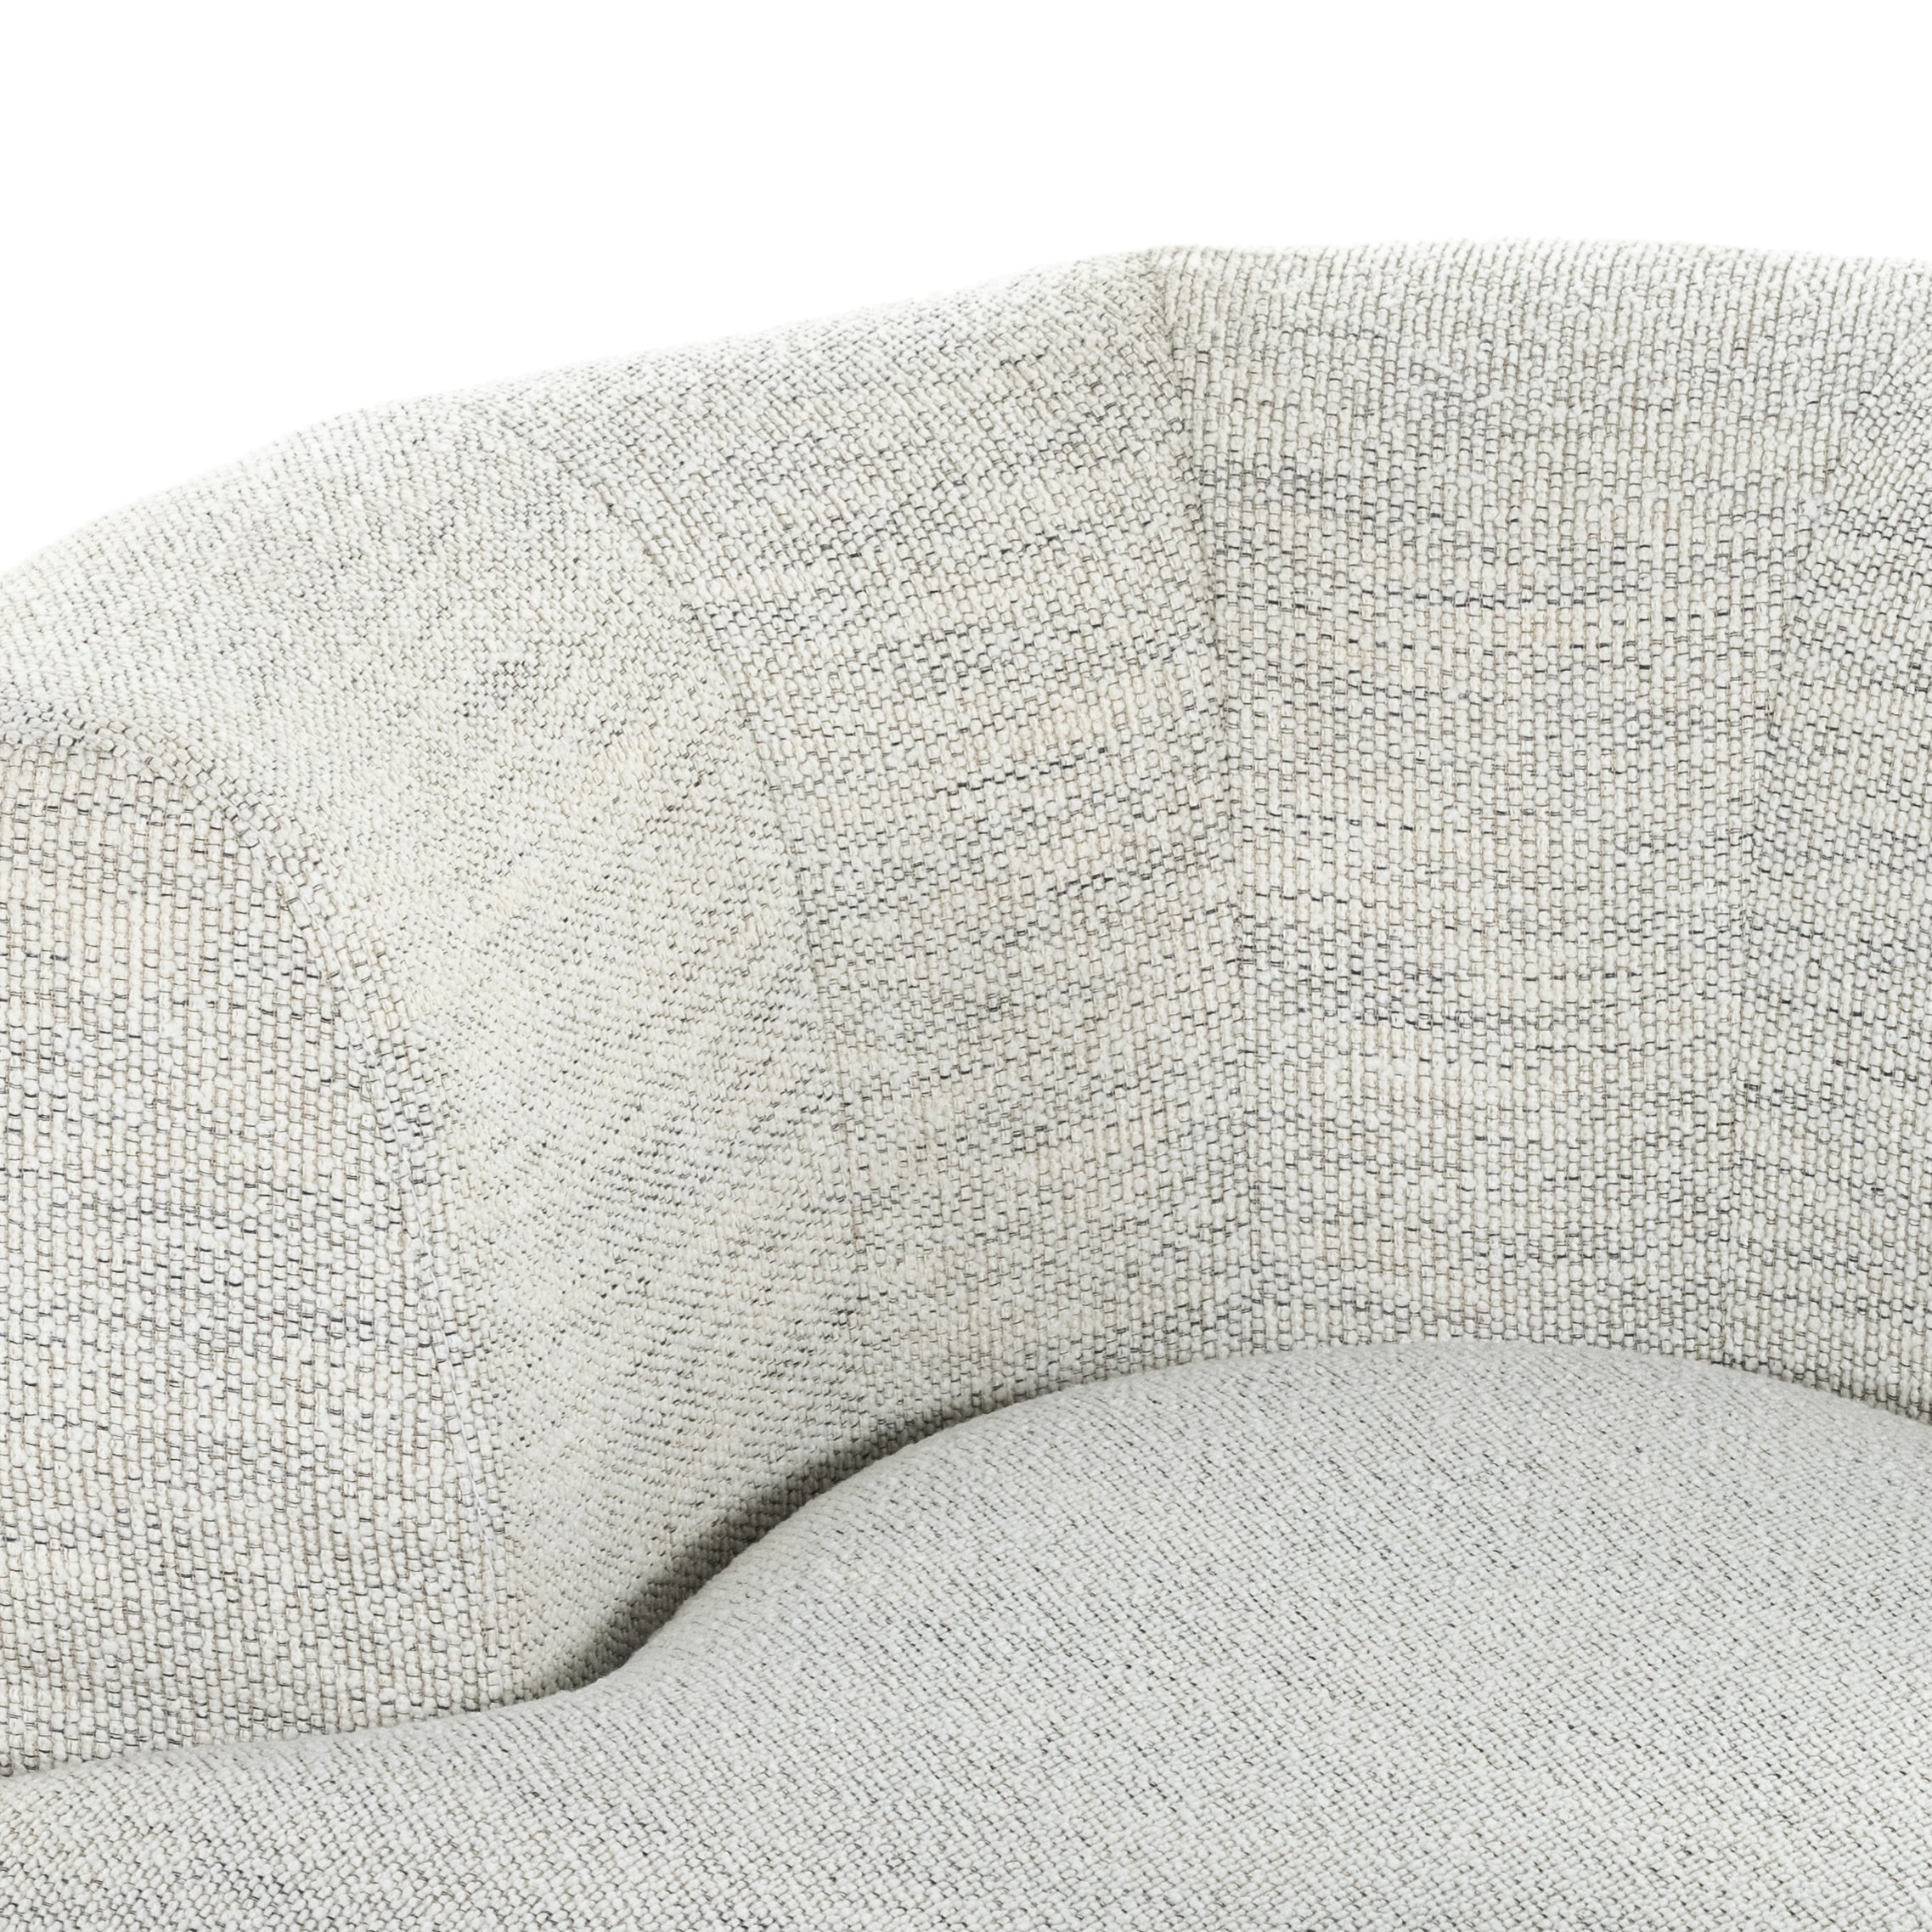 Modern European inspiration and plush curves come head to head in this stylish Deandra Tete a Tete Chaise - Merino Cotton. Upholstered in a soft liquid-repellent performance fabric that feels both casual and elevated, this is the perfect choice for families with kids or pets!  Overall Dimensions: 90.50"w x 38.00"d x 29.00"h